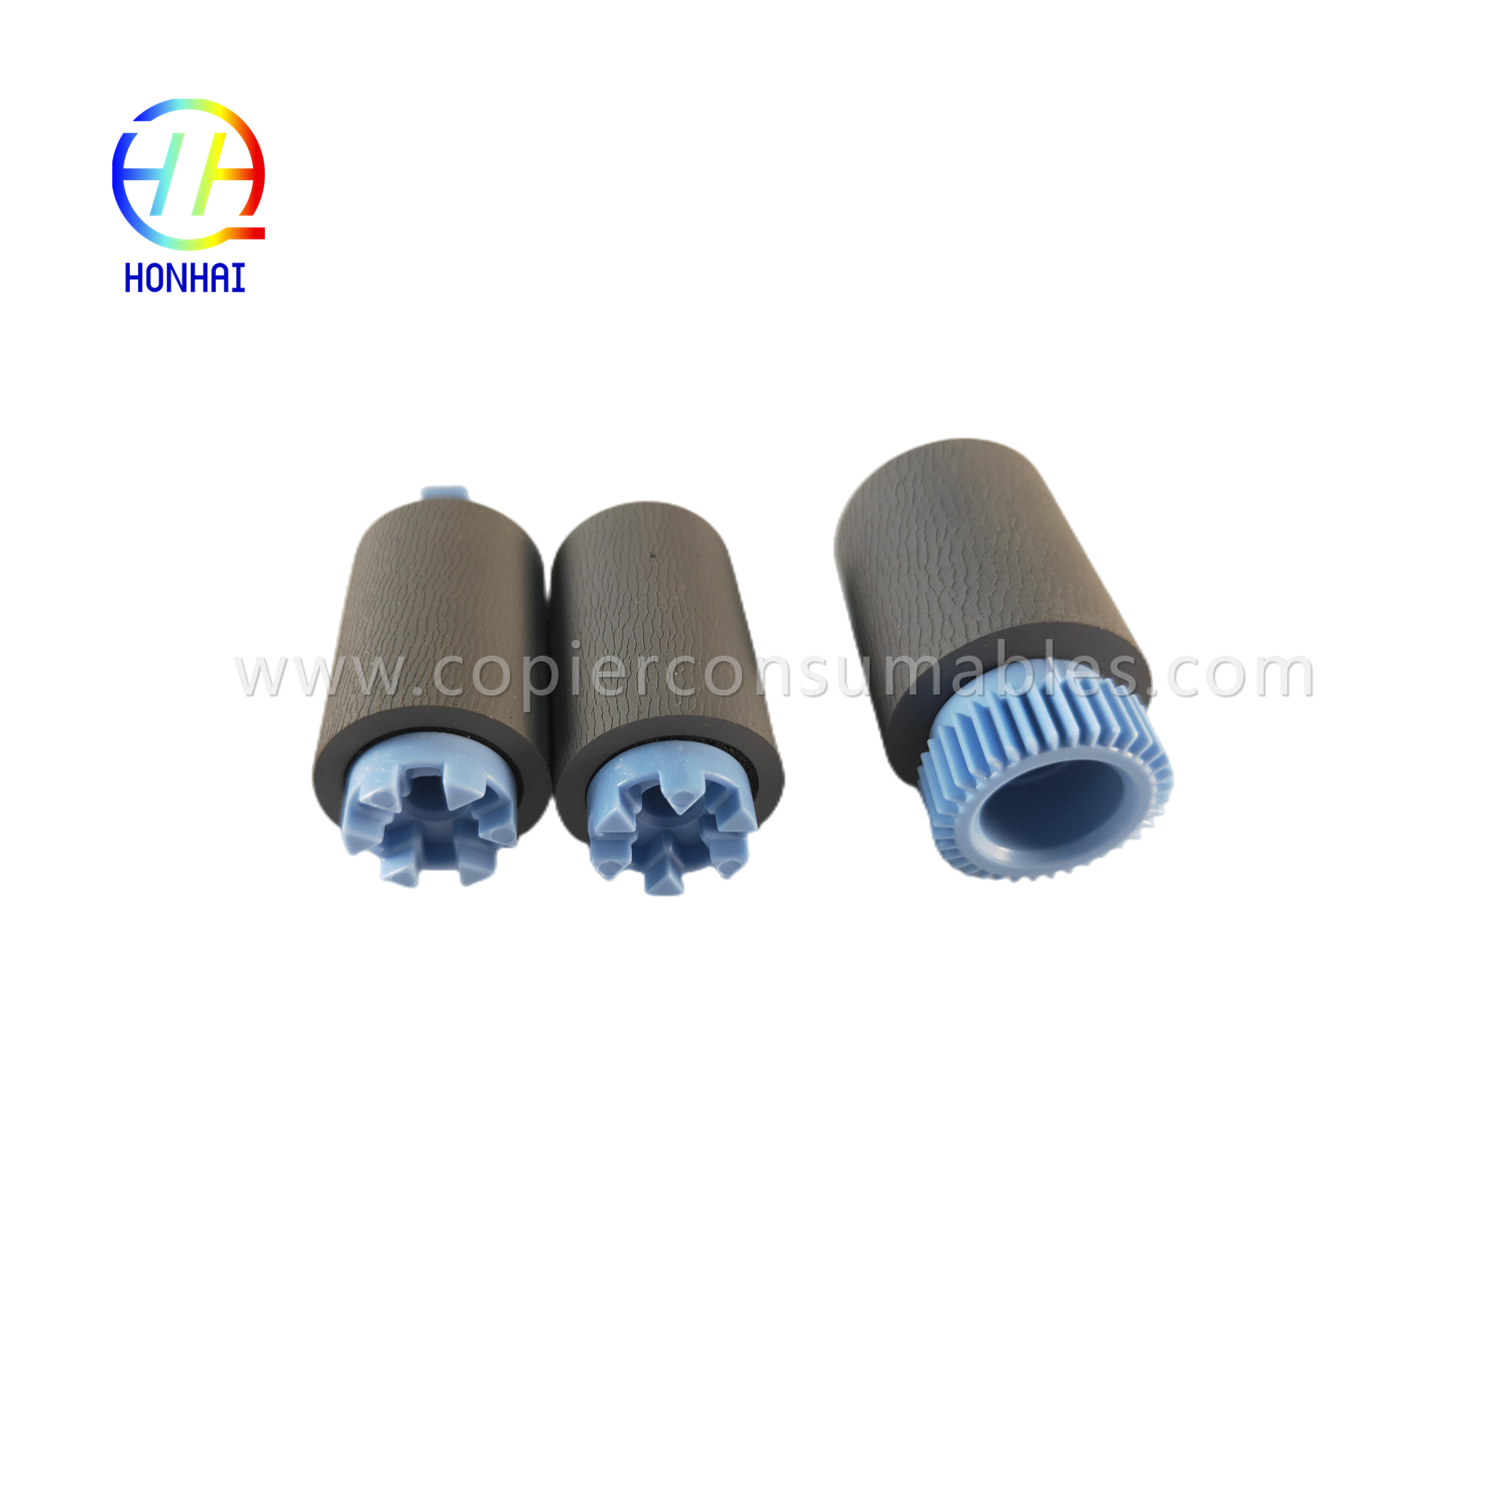 https://www.copierconsumables.com/tray-2-5-pickup-feed-separation-roller-set-for-hp-a7w93-67082-mfp-785f-780dn-e77650z-e77660z-e7767650z-e77650dn-70dn-70 p77750z-p77760z-p75050dn-p75050dw-product/